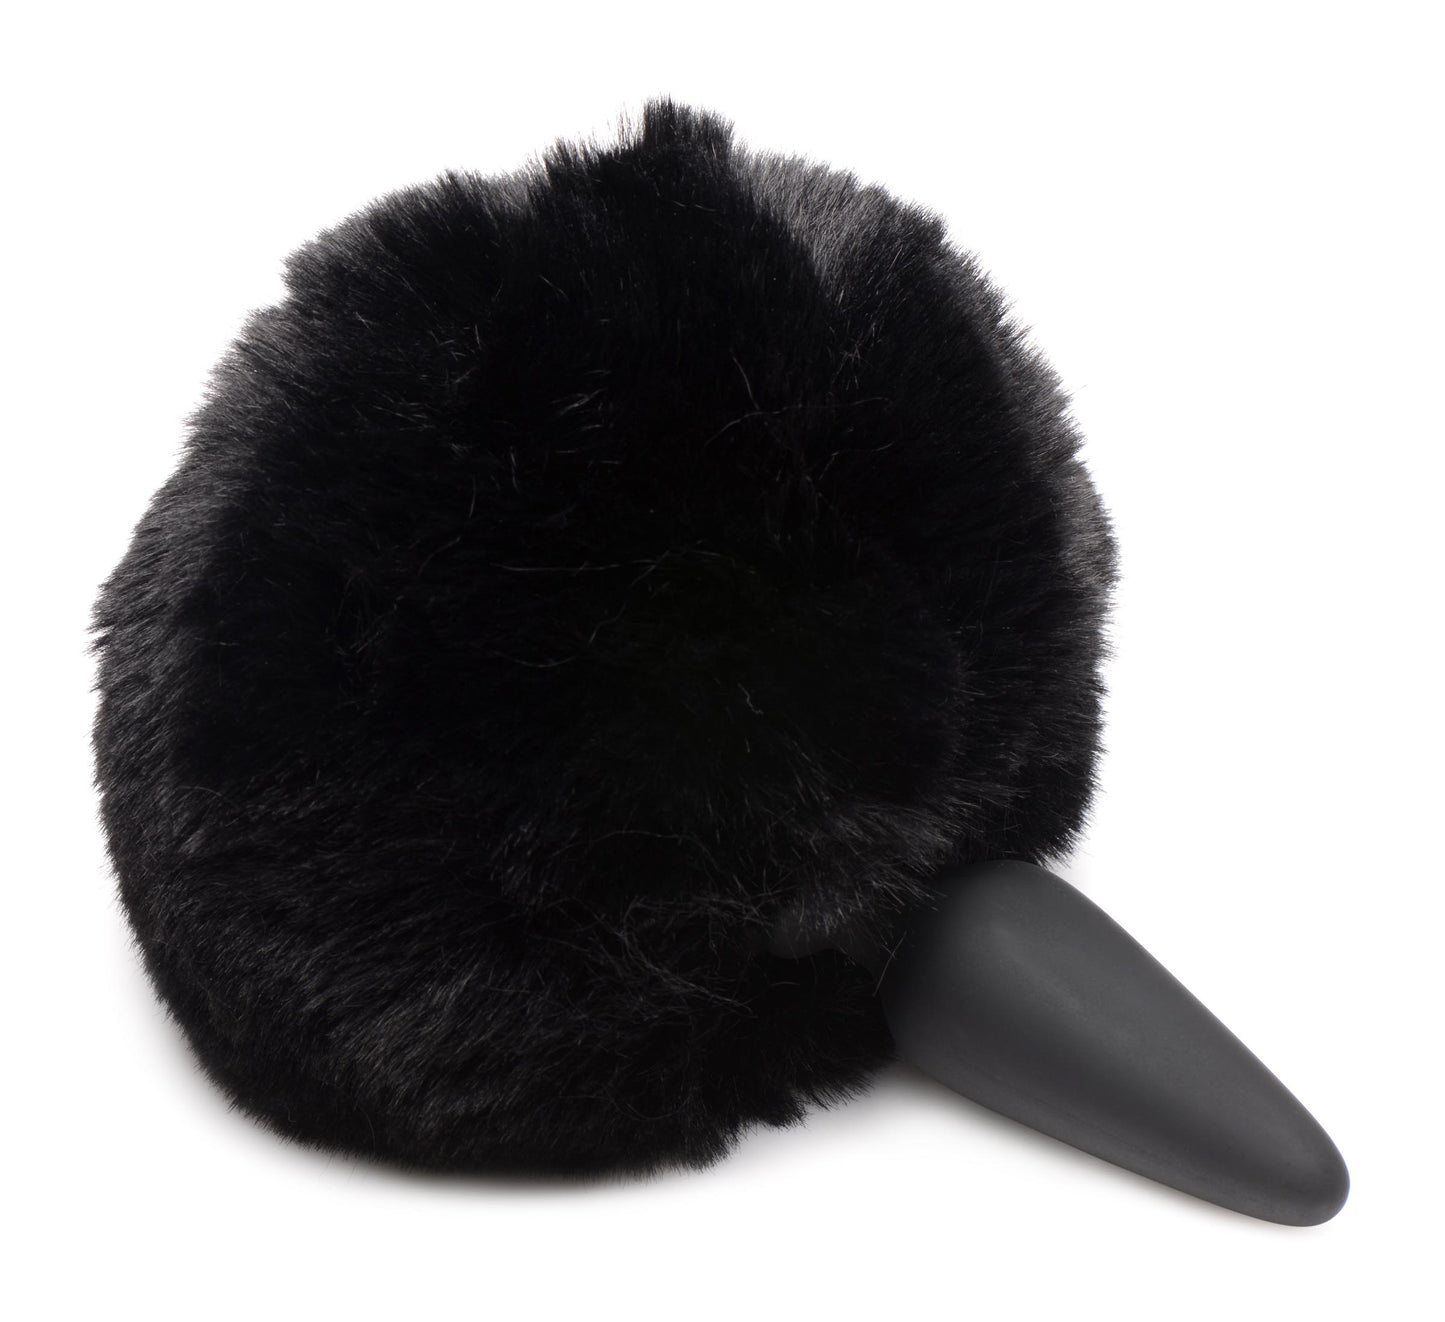 Small Anal Plug With Interchangeable Bunny Tail - Black